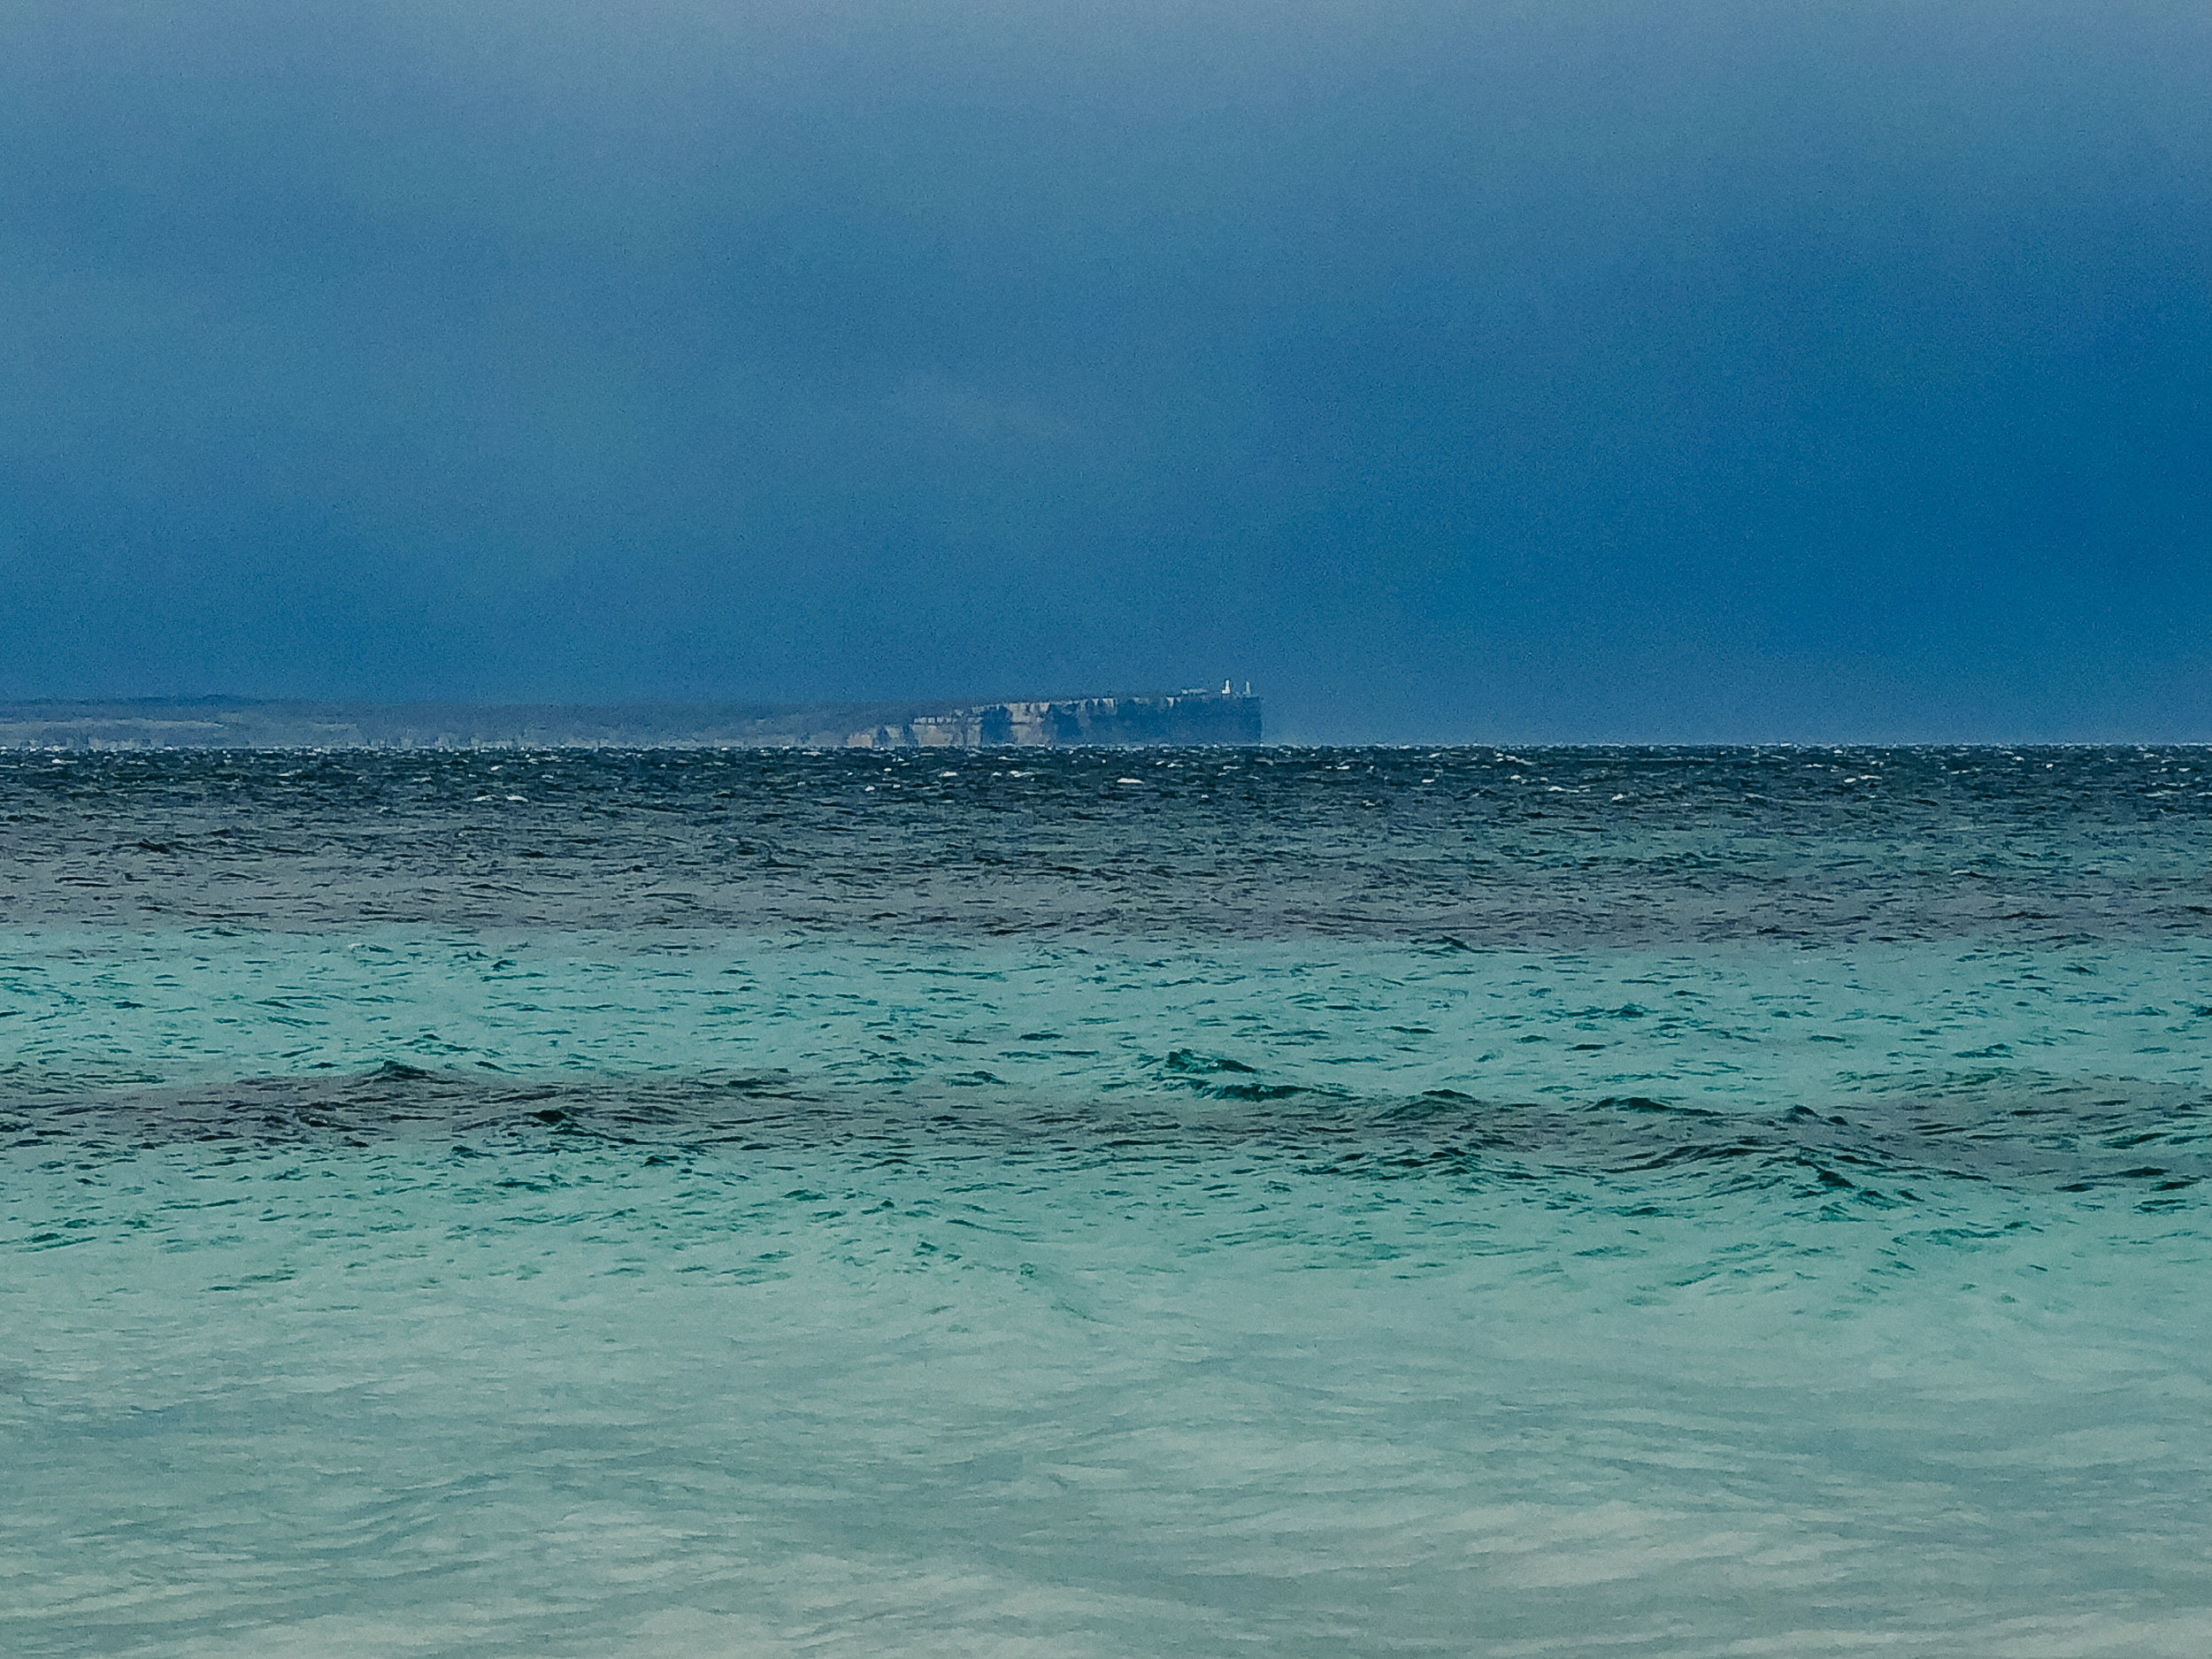  Here you can see Point Perpendicular in the distance, from Hyams Beach. 